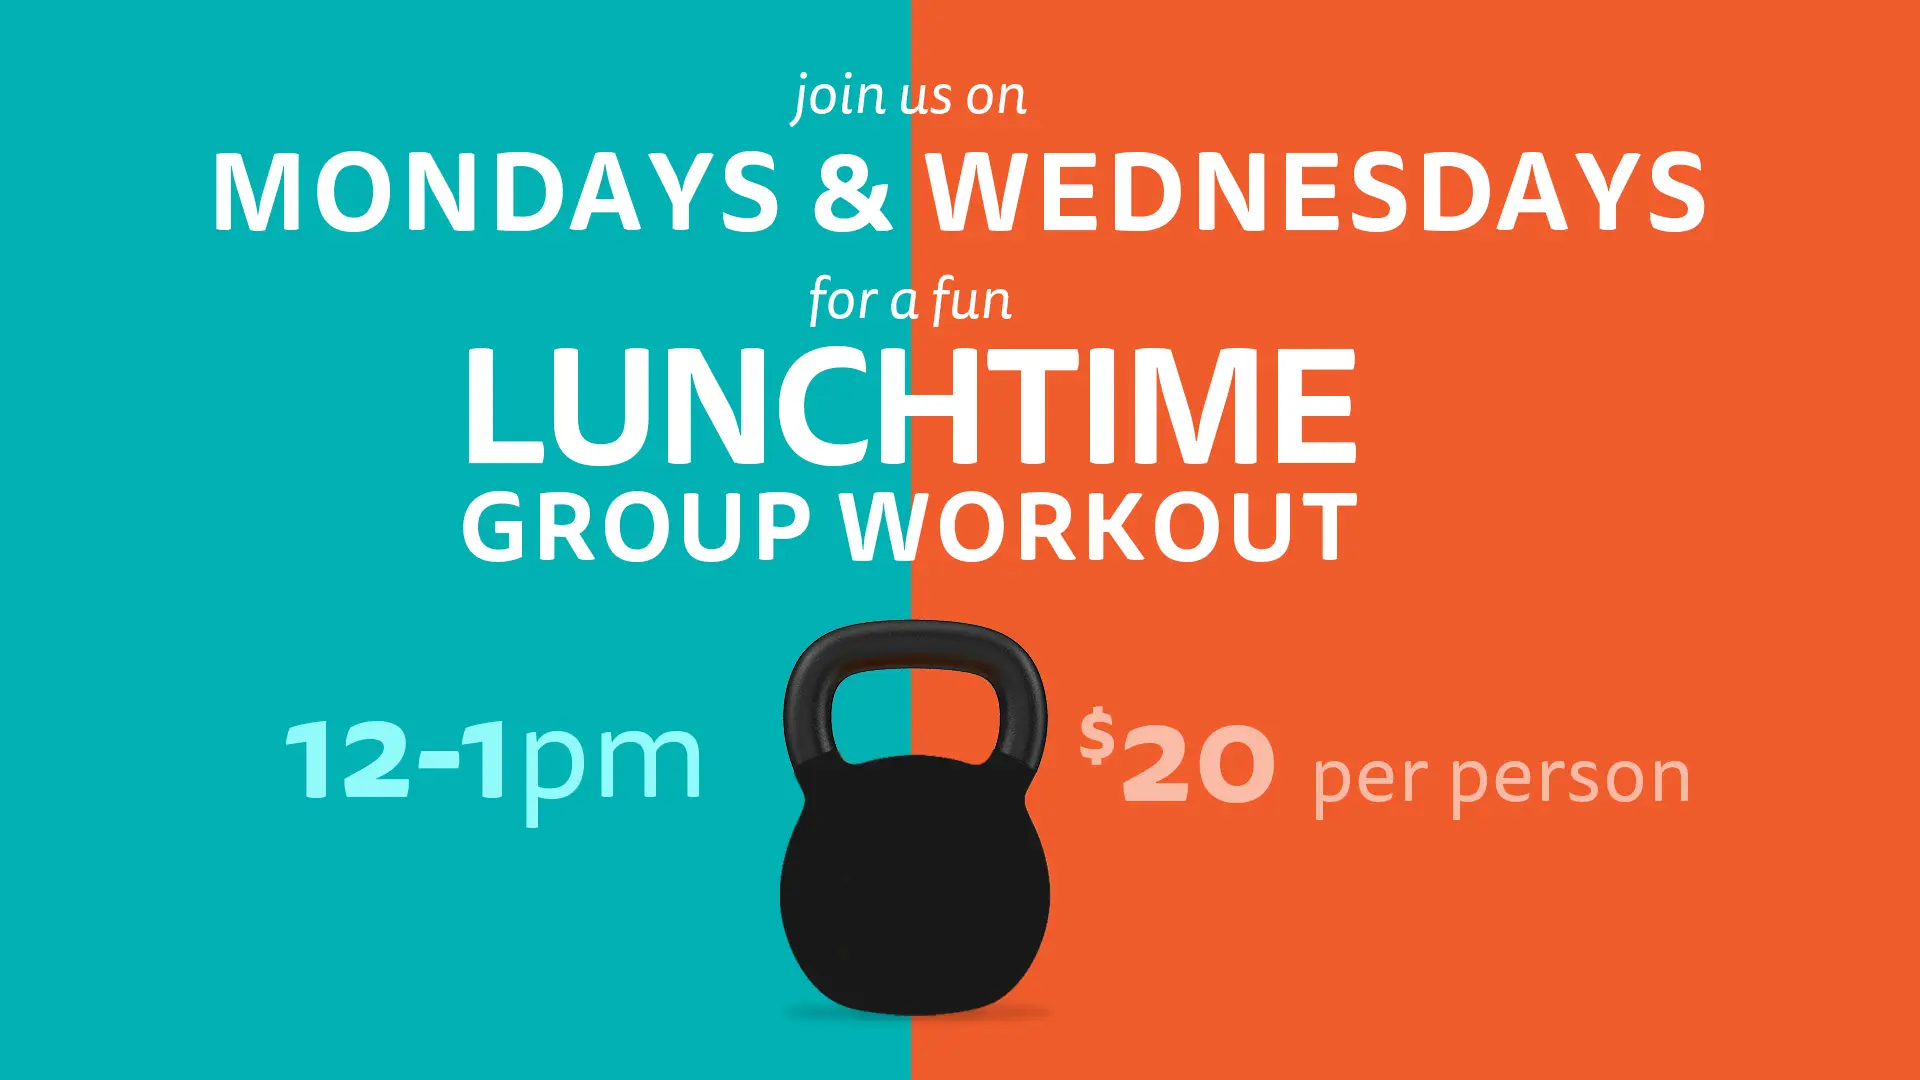 Lunchtime workouts at Thrive